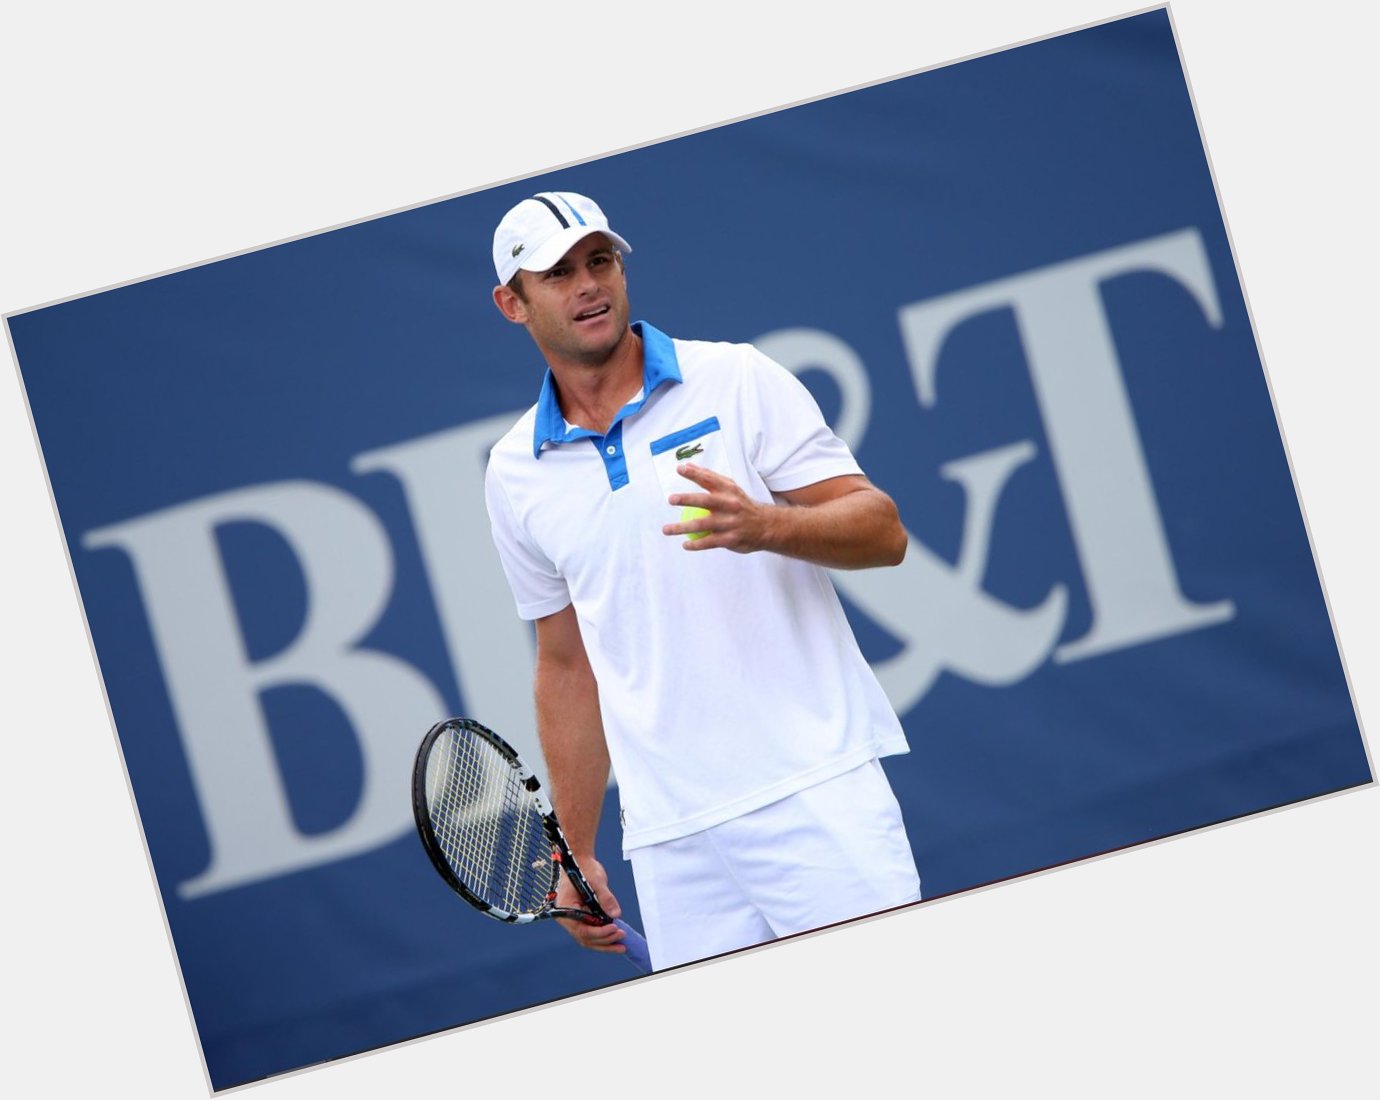 Happy Birthday to a US open champion in Andy Roddick who turns 39 today Have a great day  